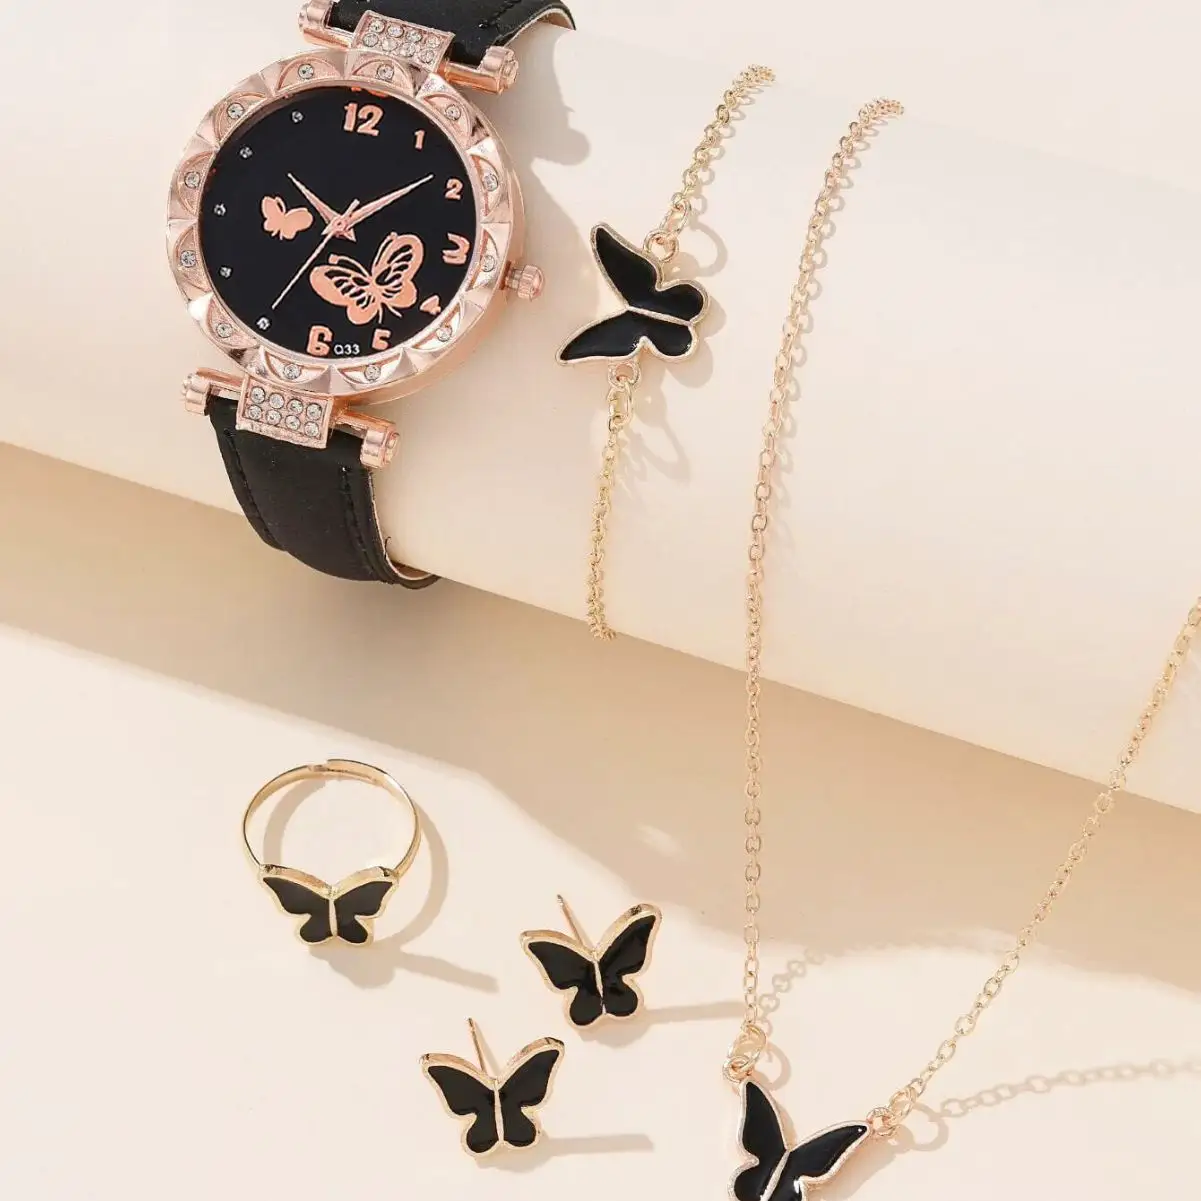 Popular 4691 Ladies Watch with 5 pcs Bracelet Necklace Earring Ring Set Women Wristwatch Personalized Simple Watches